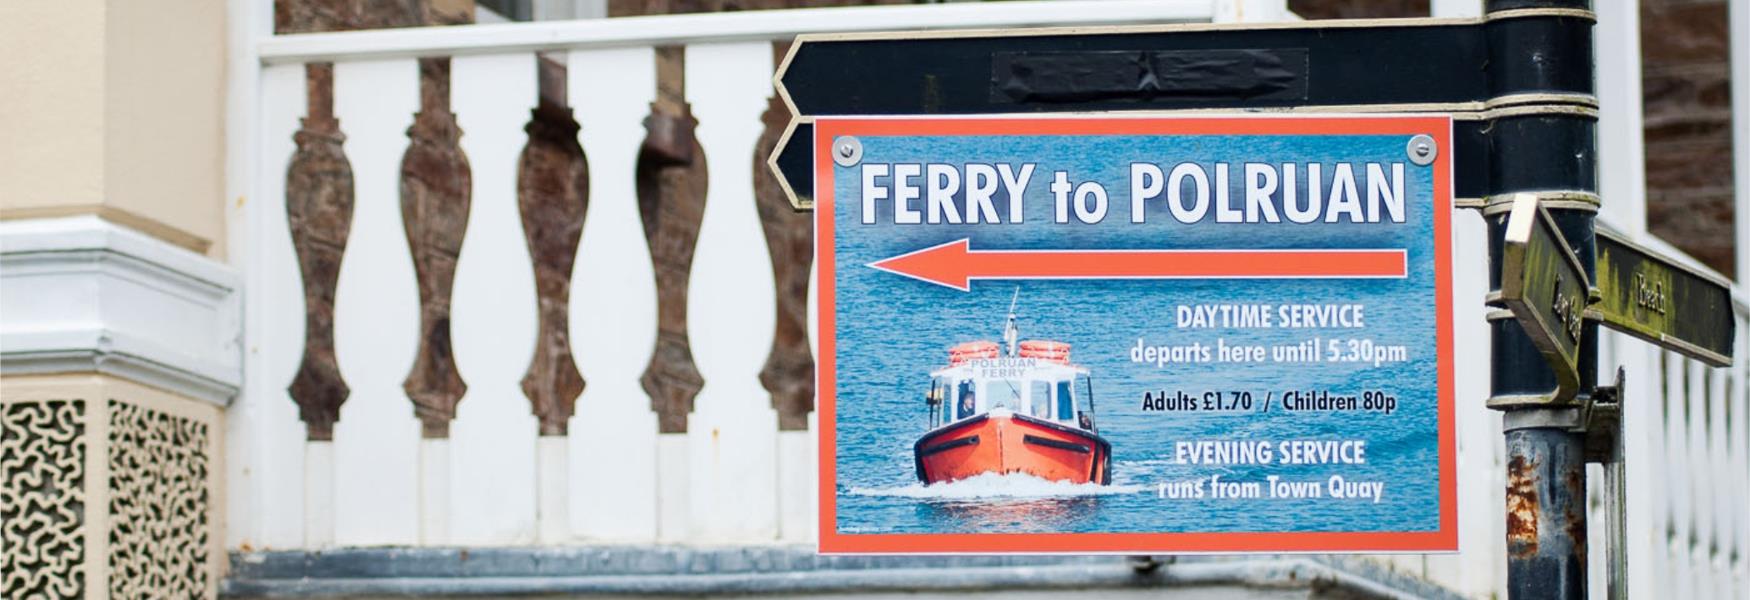 Ferry to Polruan sign (c) Justine Hambly Photography